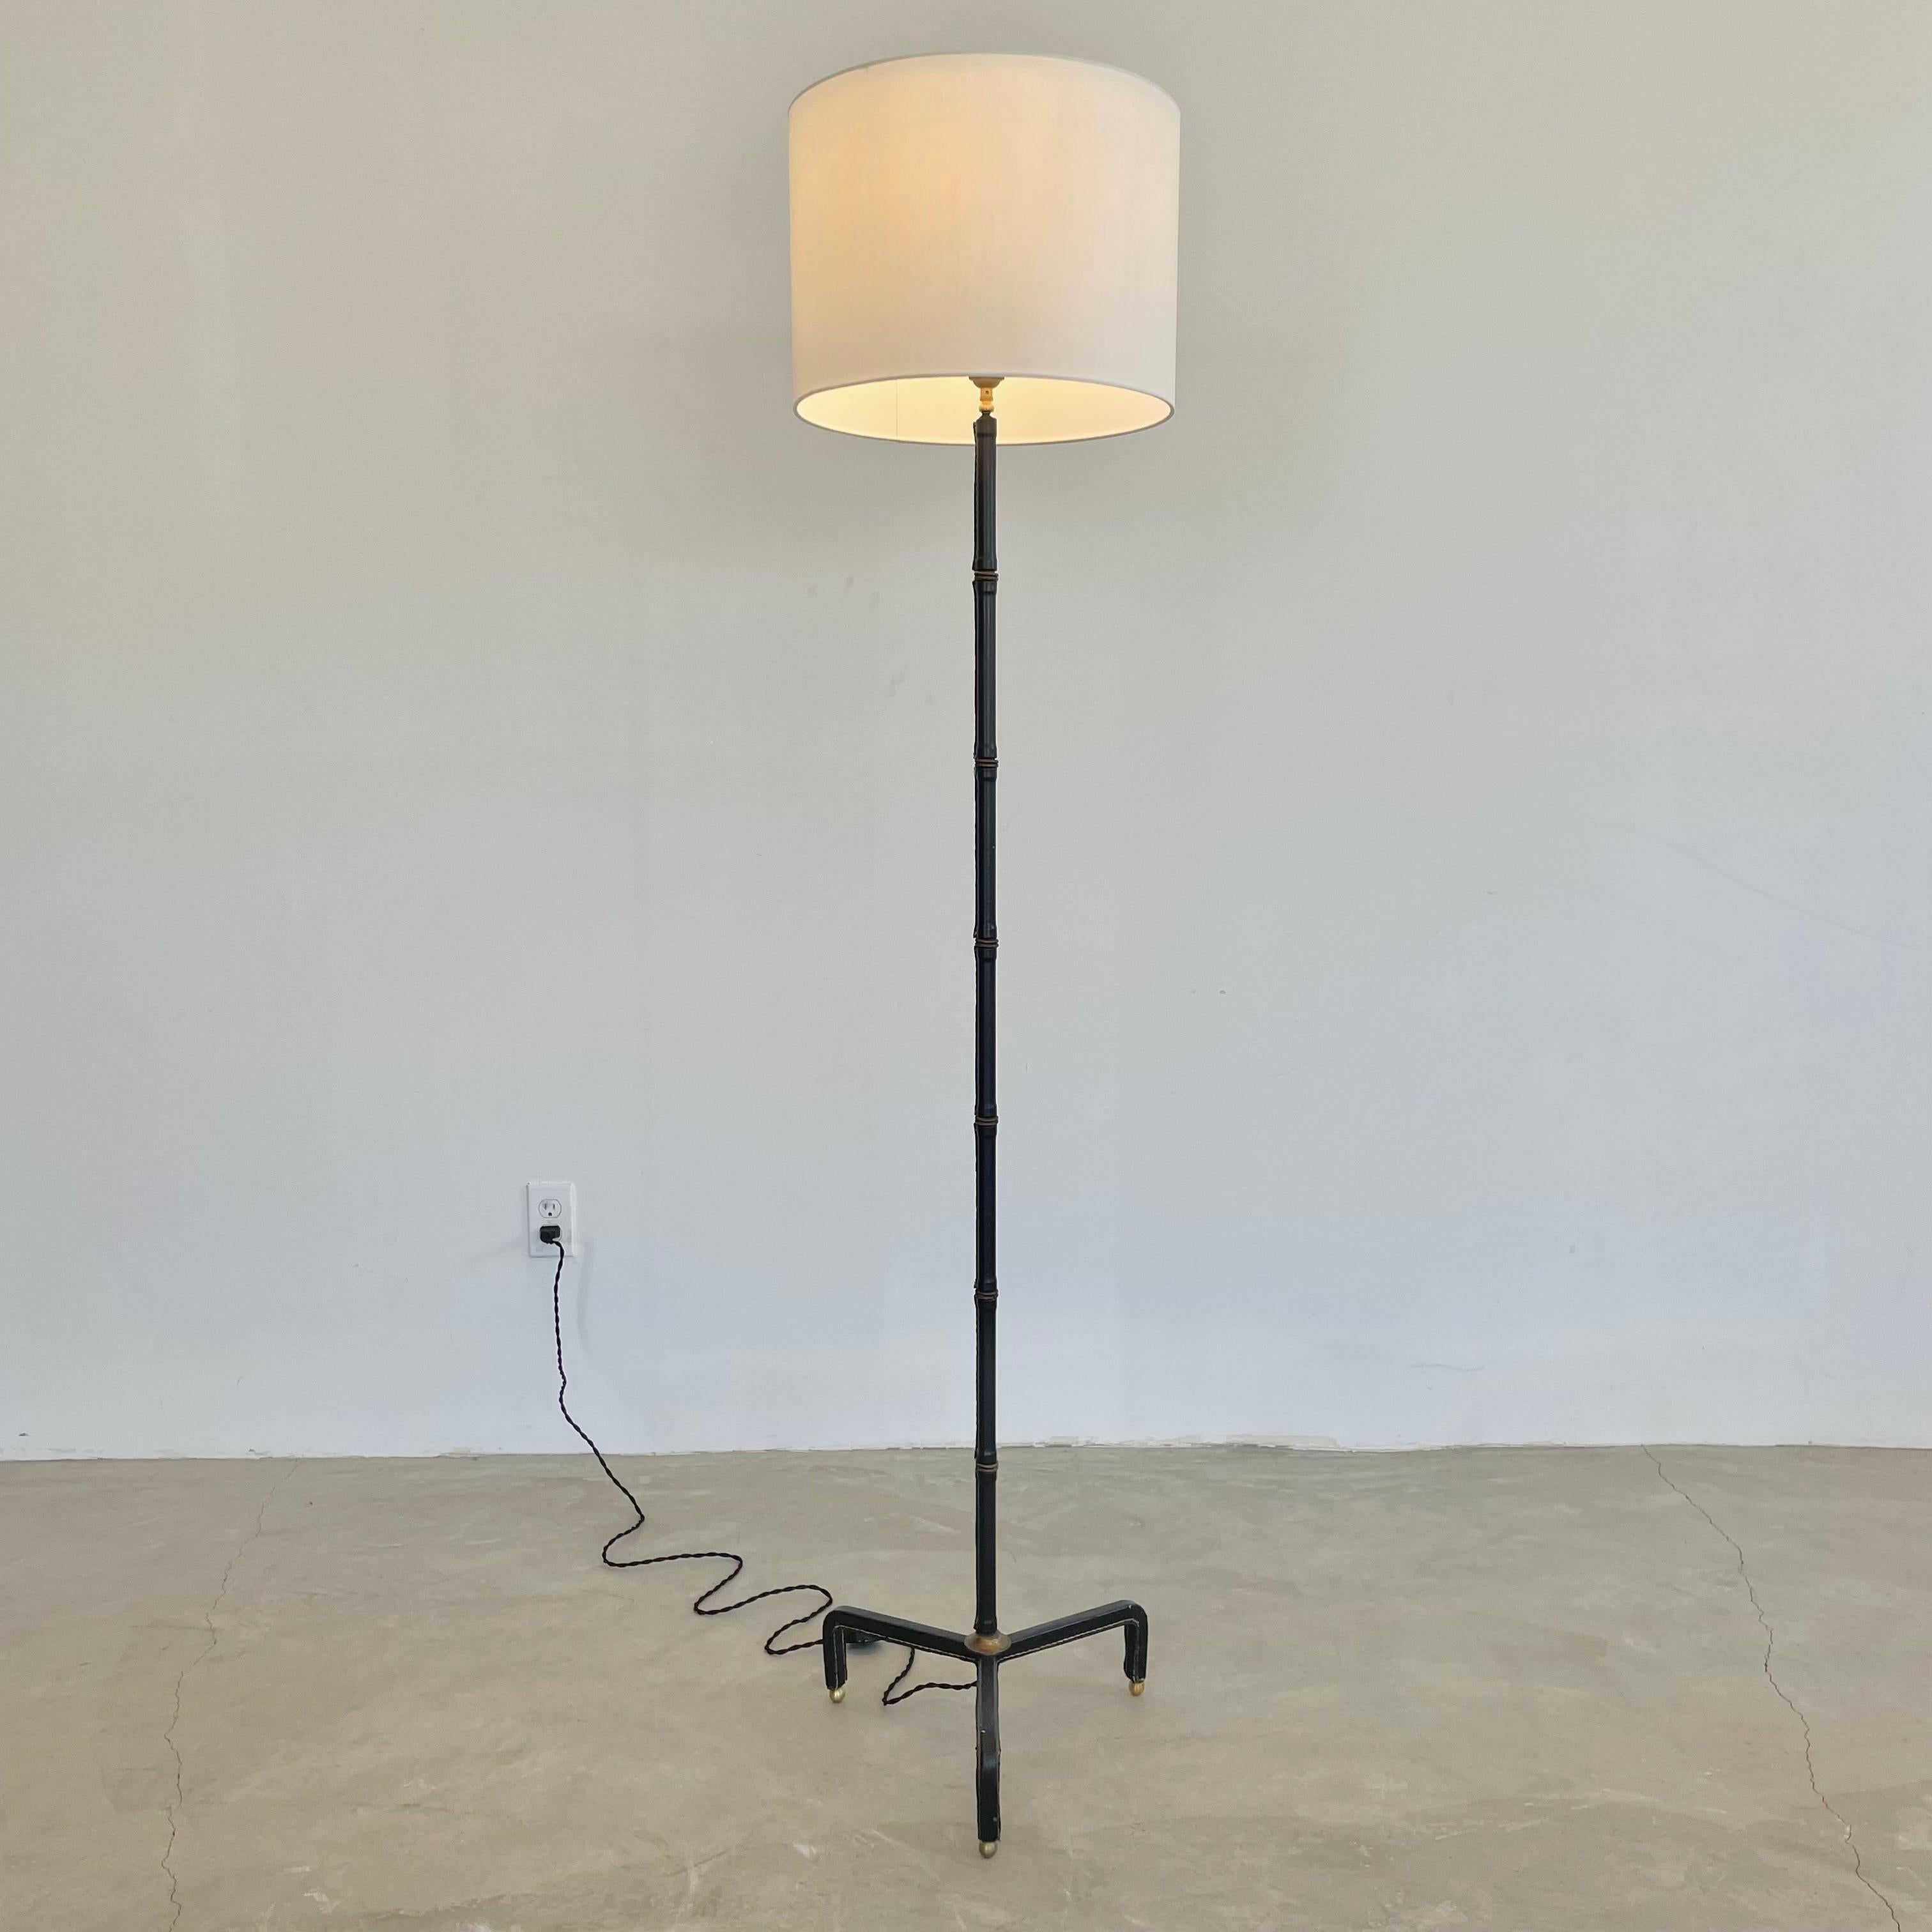 Handsome black leather and brass floor lamp by French designer Jacques Adnet. Made in France in the 1950s. Completely wrapped in original black leather. Standing on brass ball feet. Sleek stem which features the signature Adnet bamboo design with